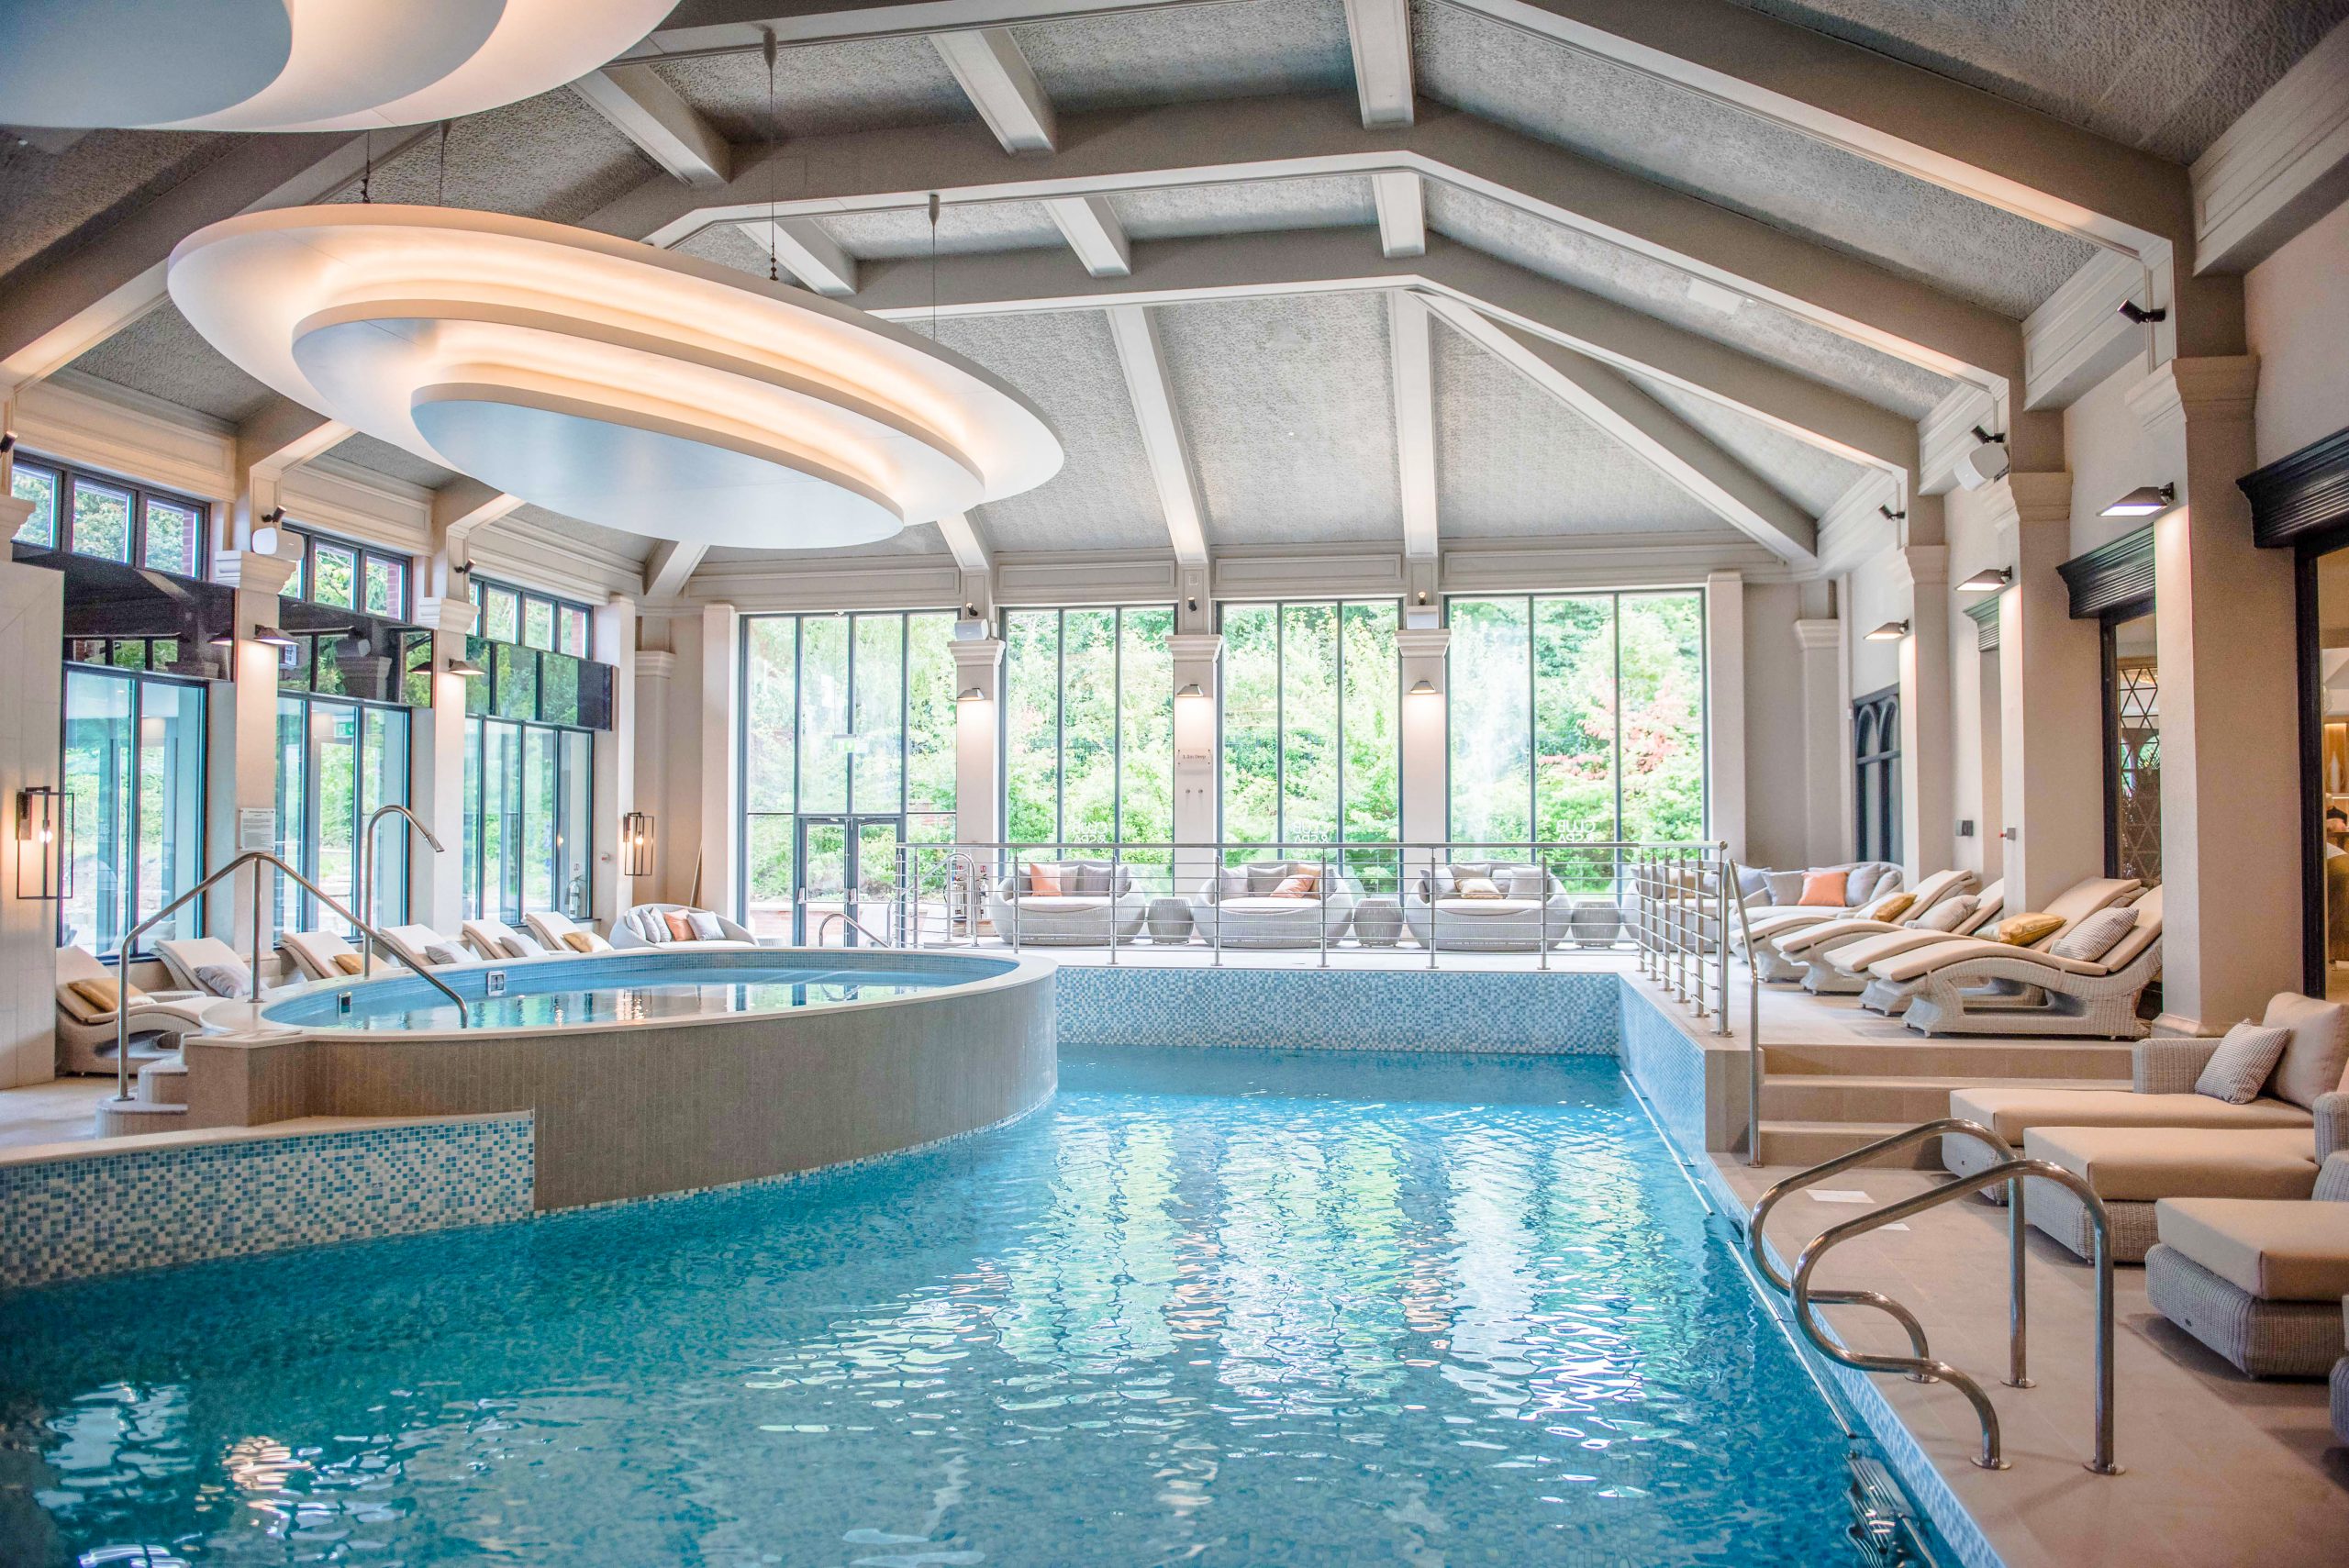 spa swimming pool with natural light and elegant fittings